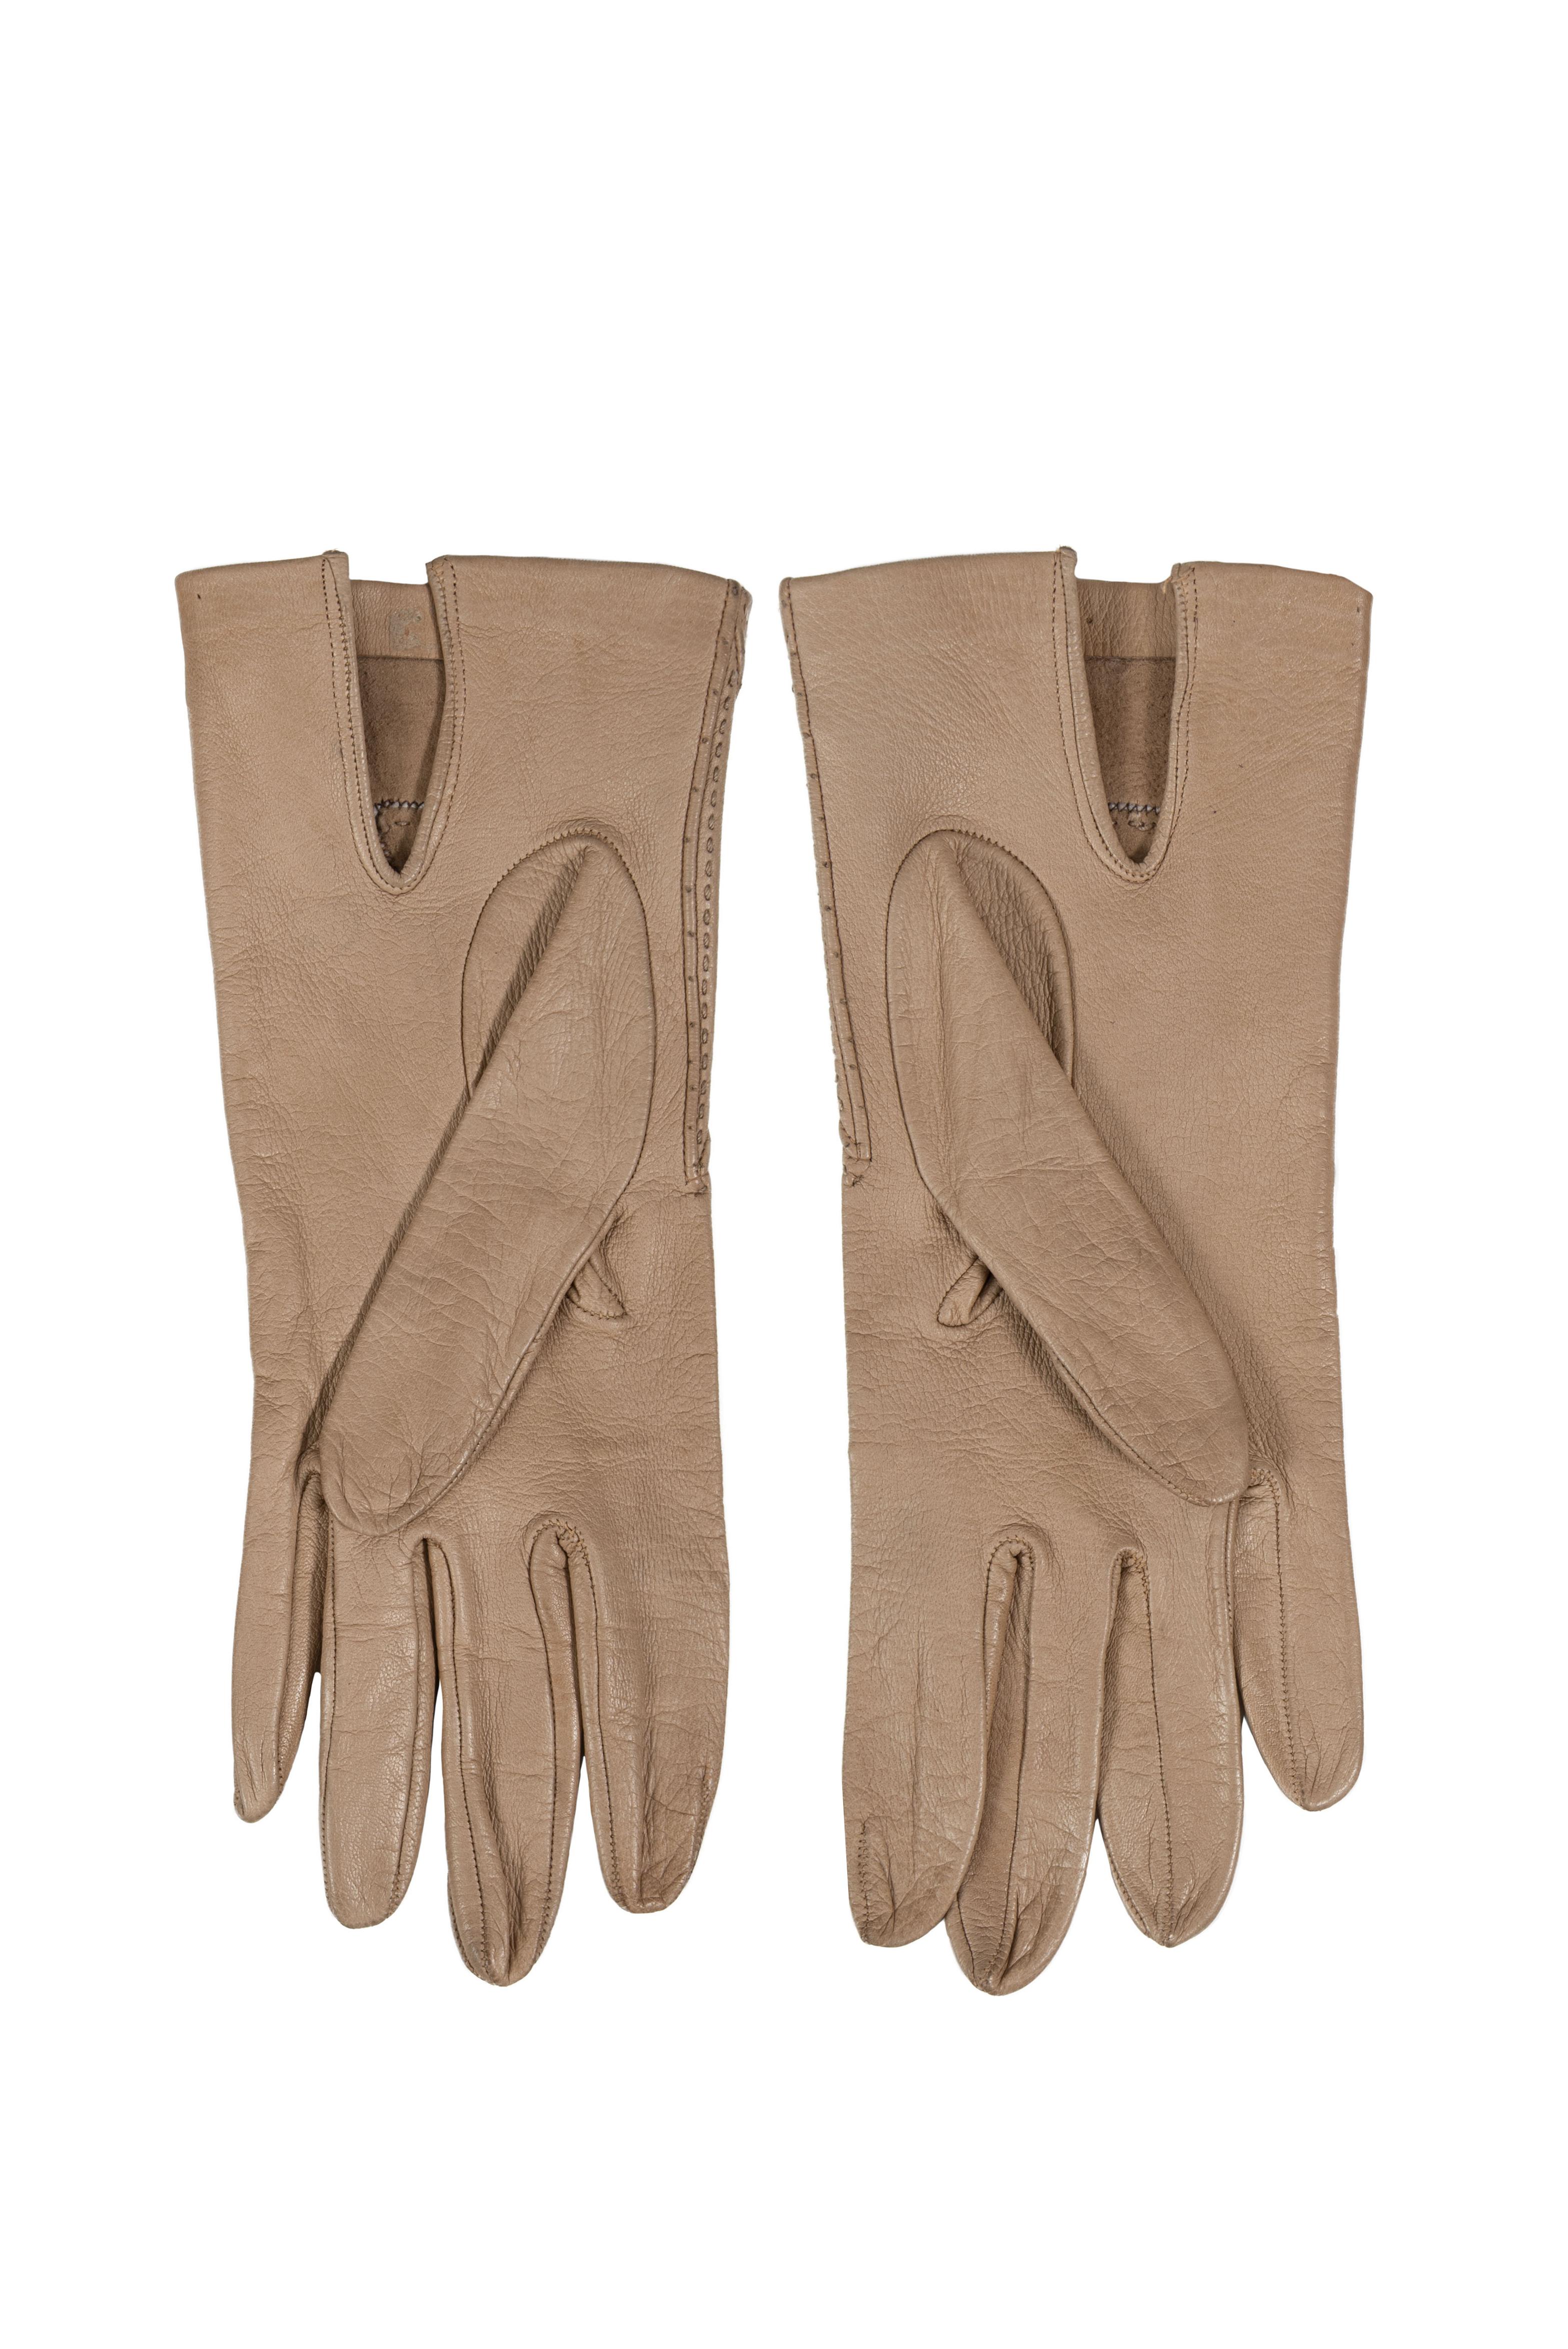 Caffè Latte Beige Smooth Leather Gloves with Geometric Stitching, 1960s In Excellent Condition For Sale In Munich, DE